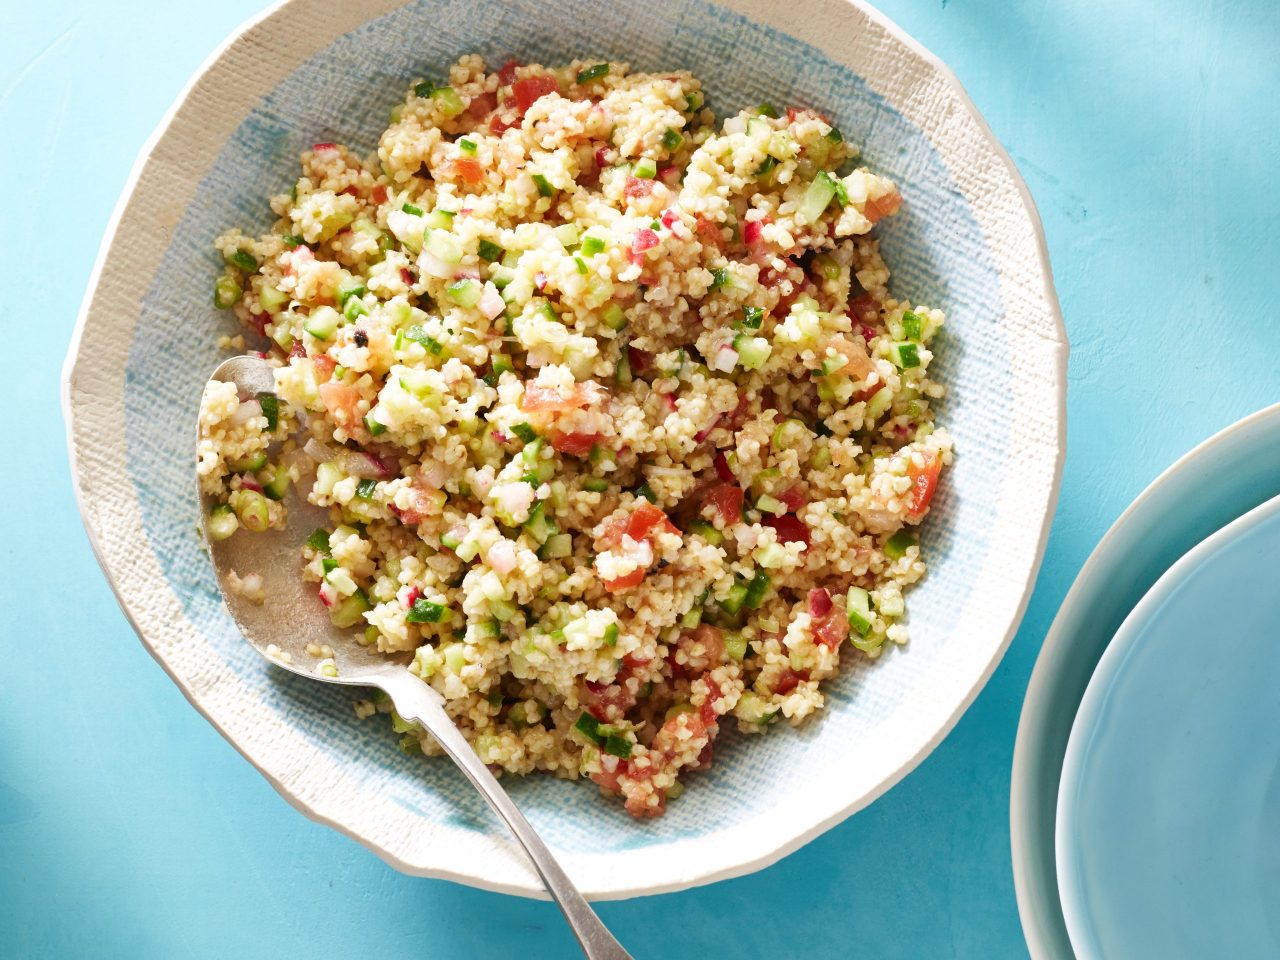 Food Network Kitchen's Toasted Millet Tabbouleh